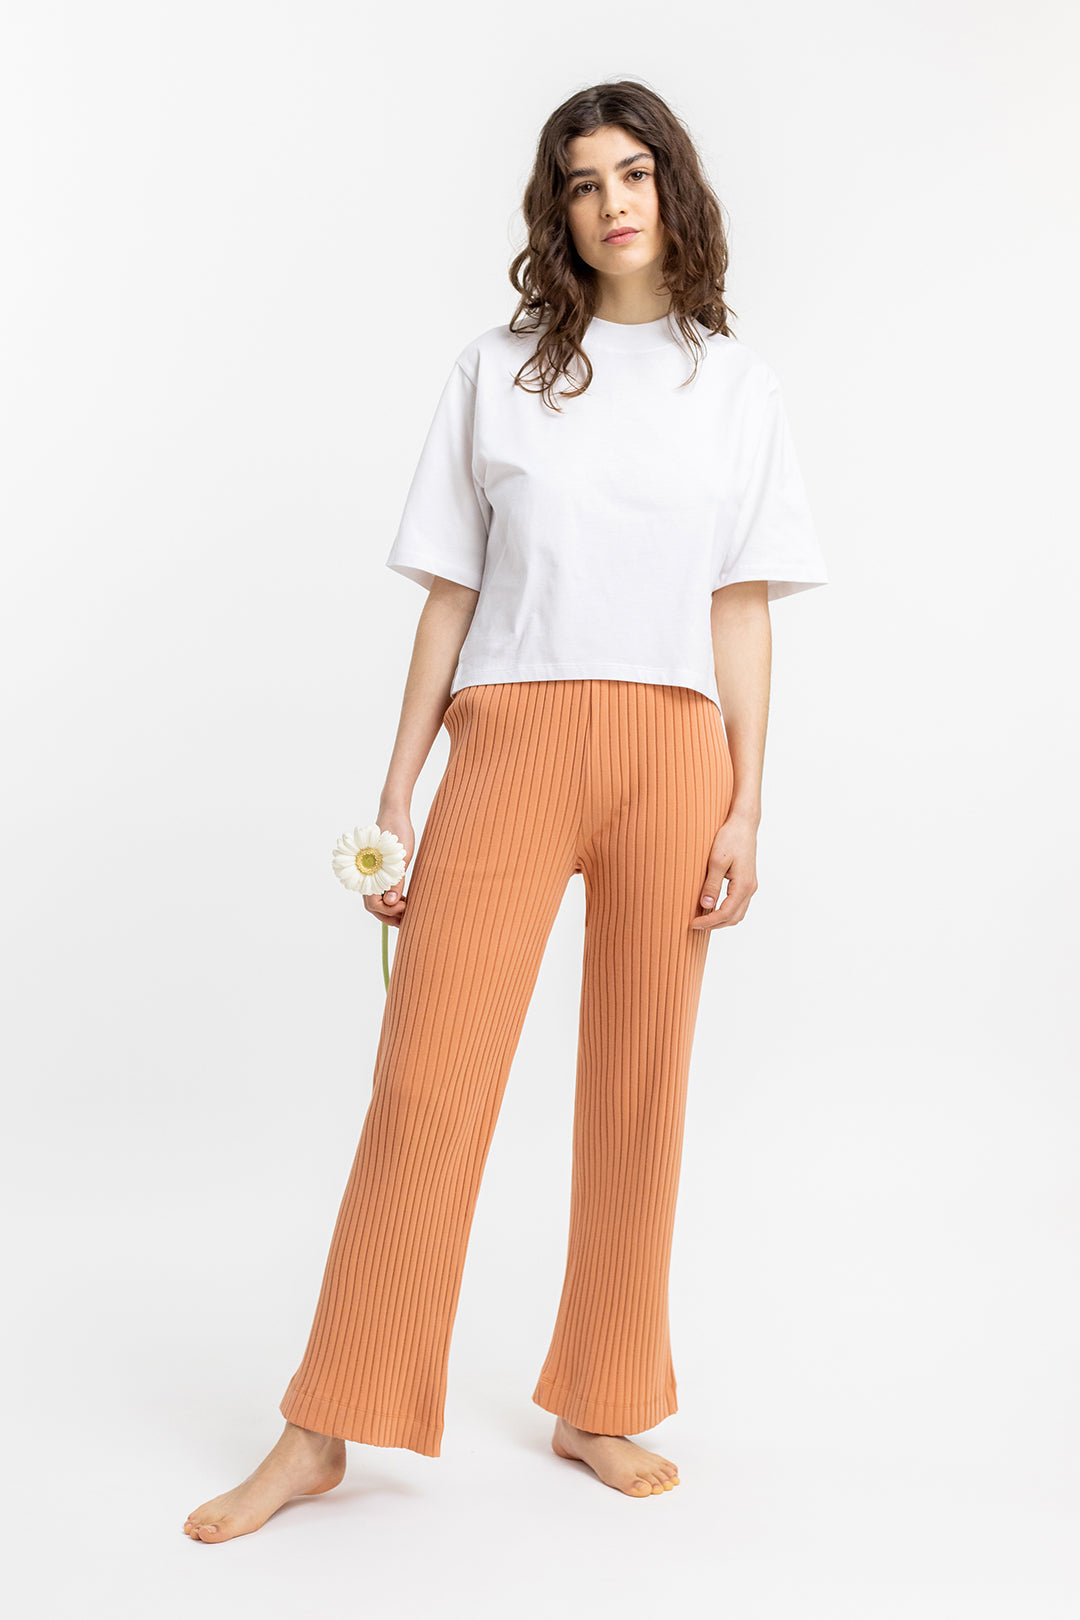 Orange, ribbed Lounge trousers made from organic cotton by Rotholz